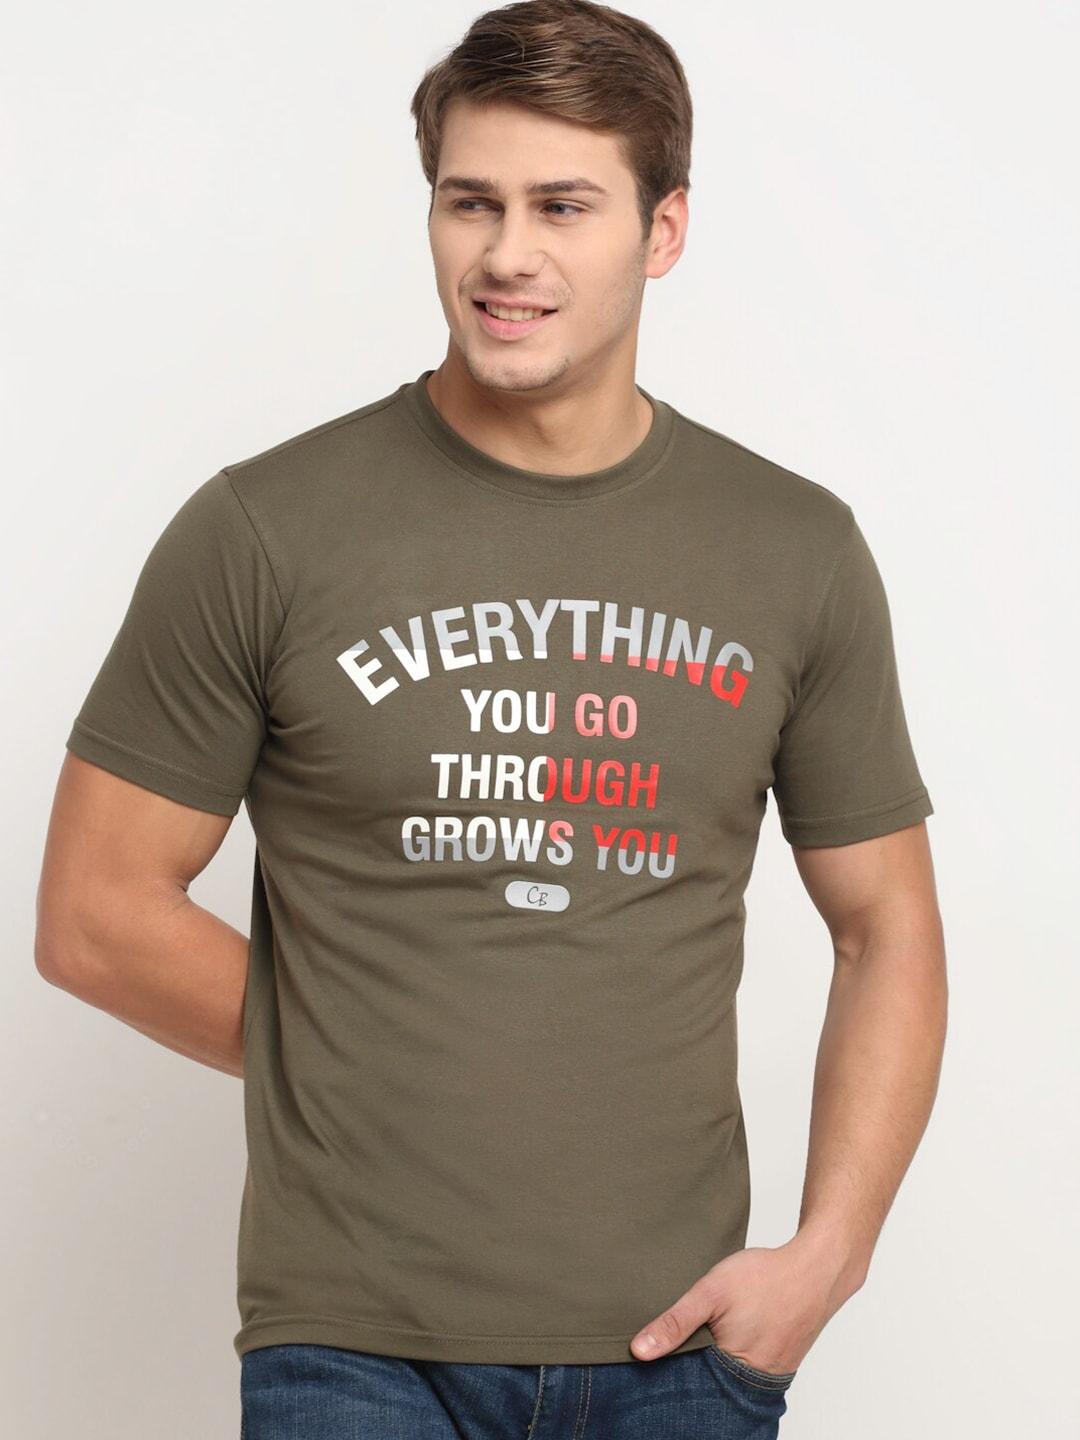 cantabil-men-olive-green-cotton-typography-printed-t-shirt